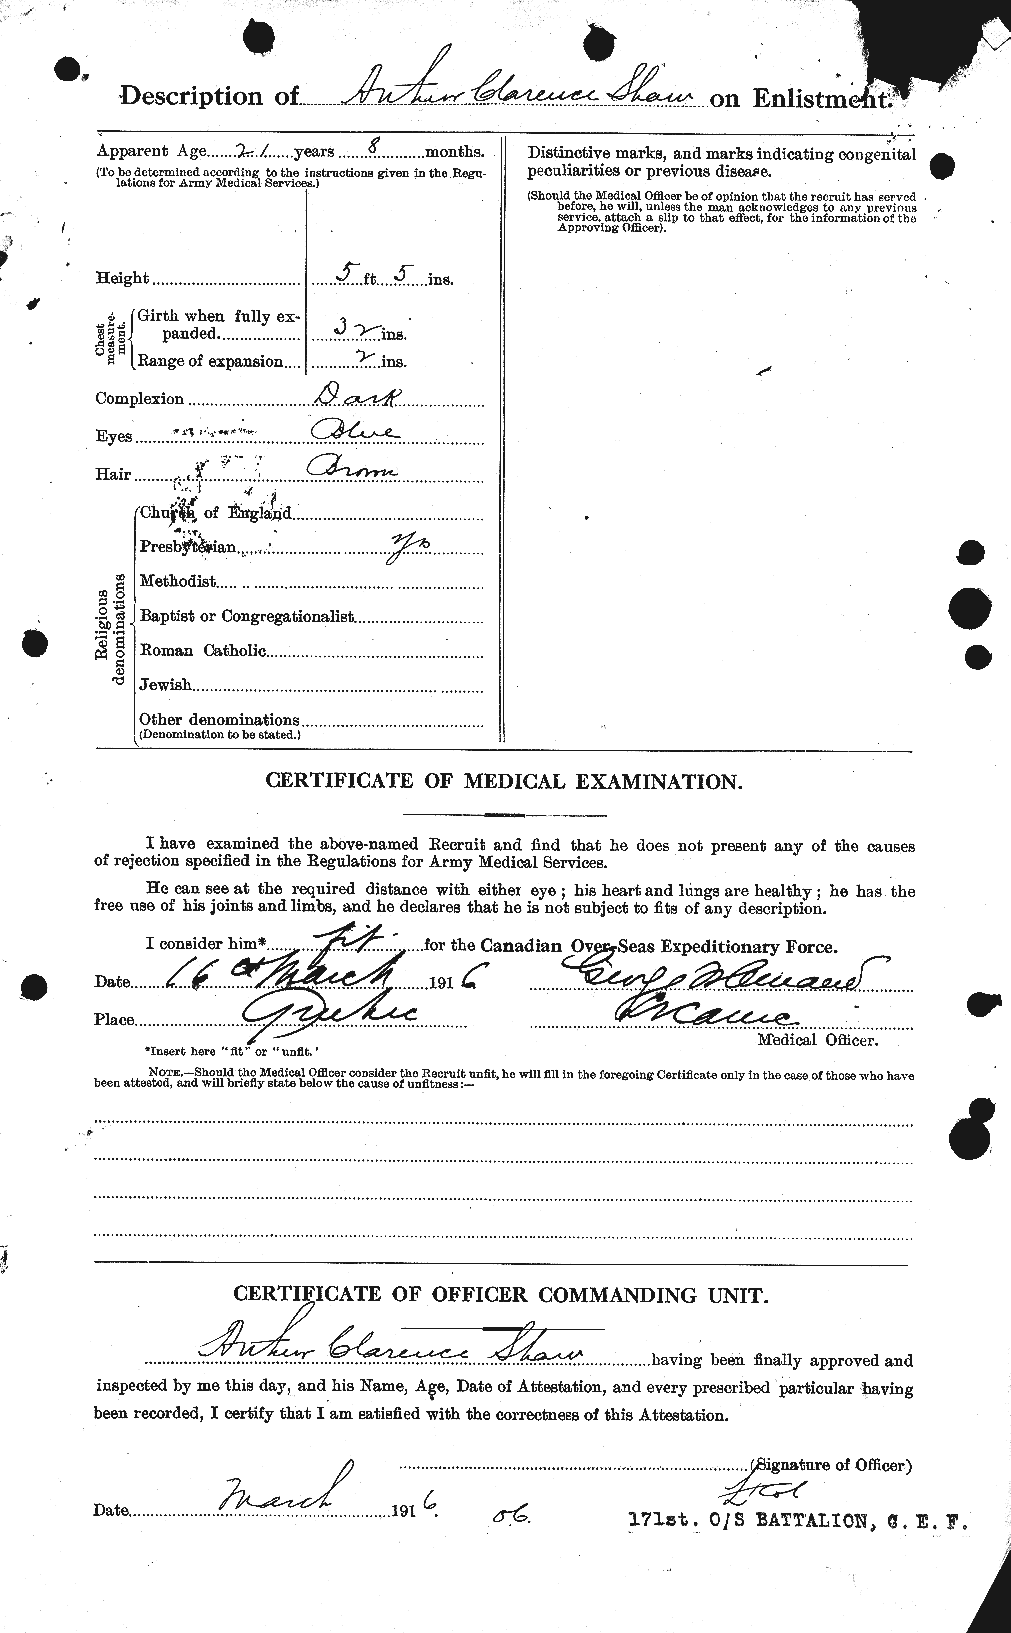 Personnel Records of the First World War - CEF 093239b